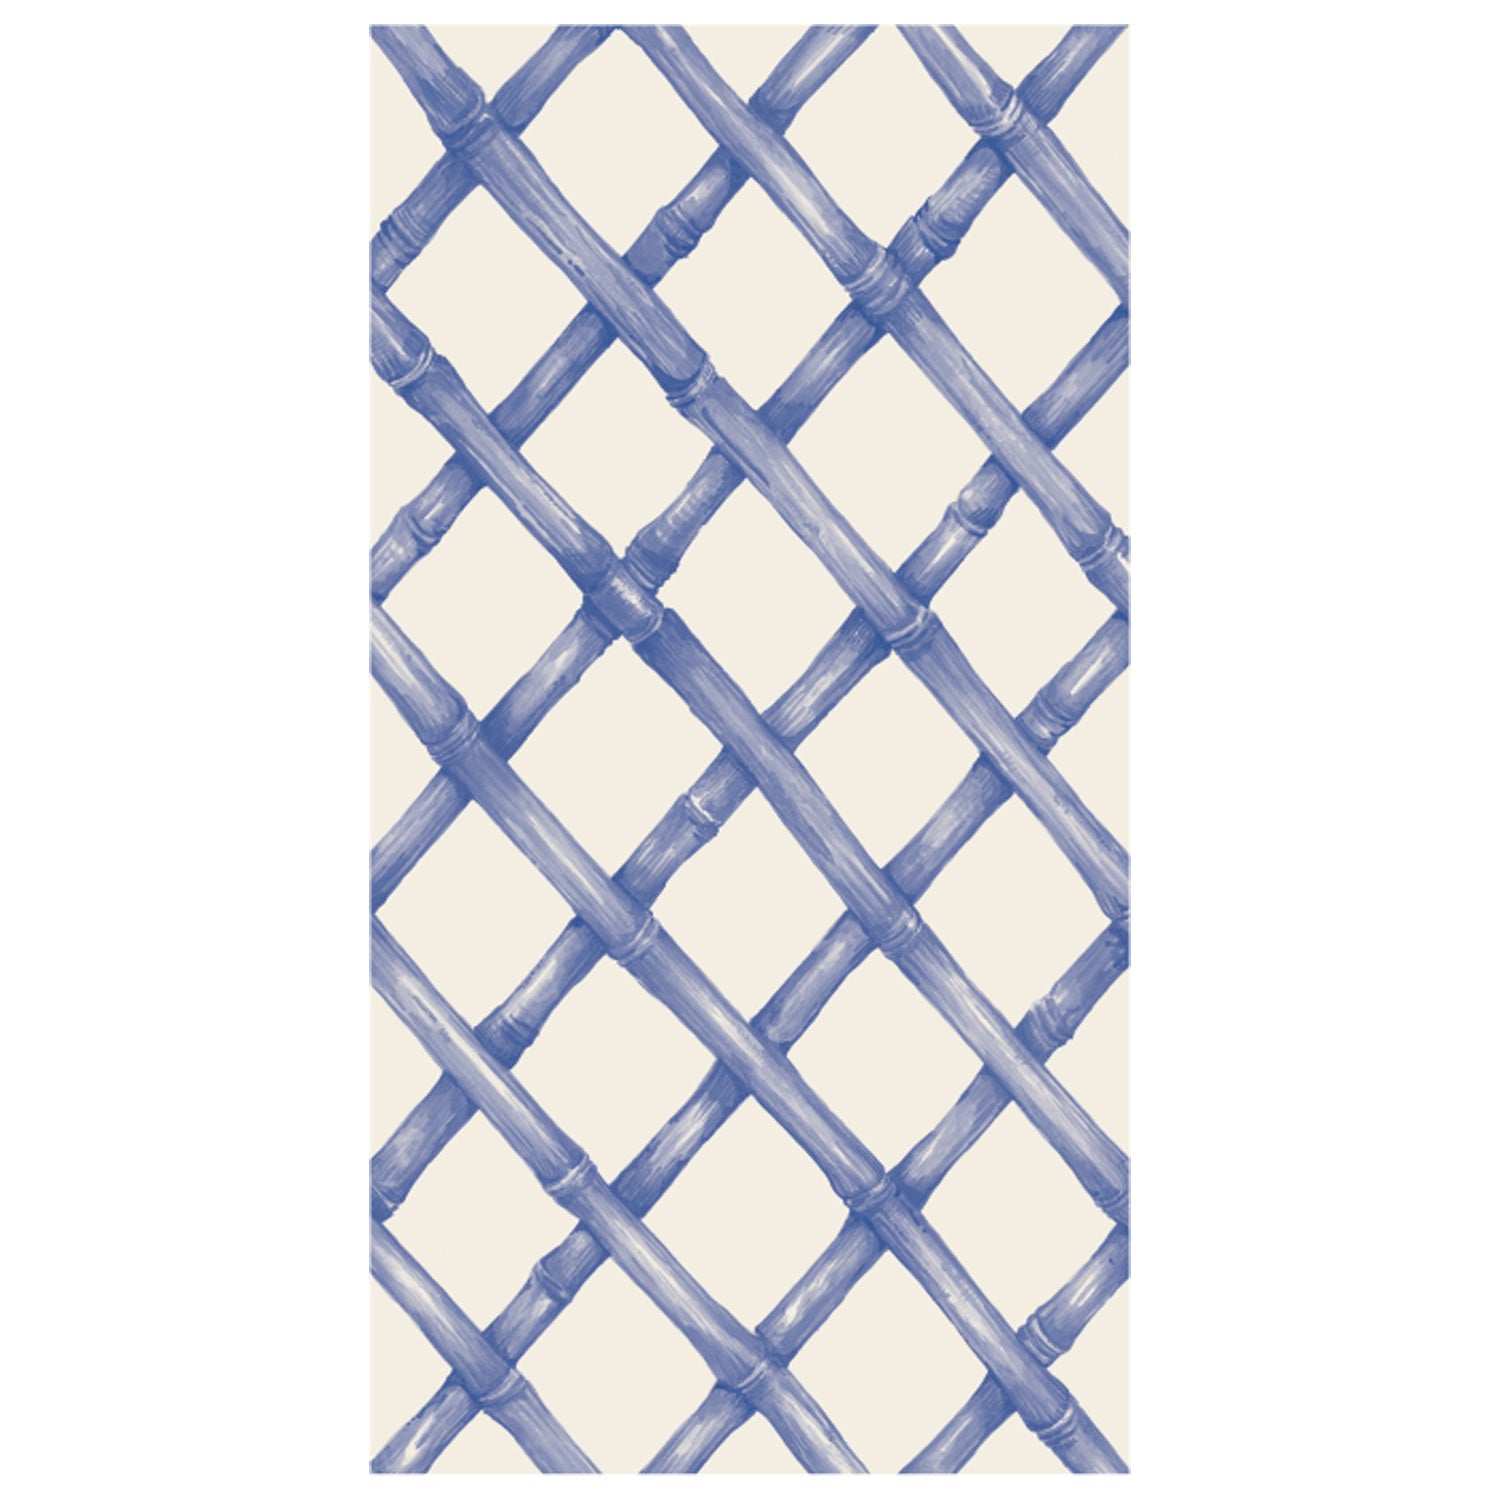 A blue and white lattice pattern on a white background with Hester &amp; Cook Blue Lattice Napkins ink.